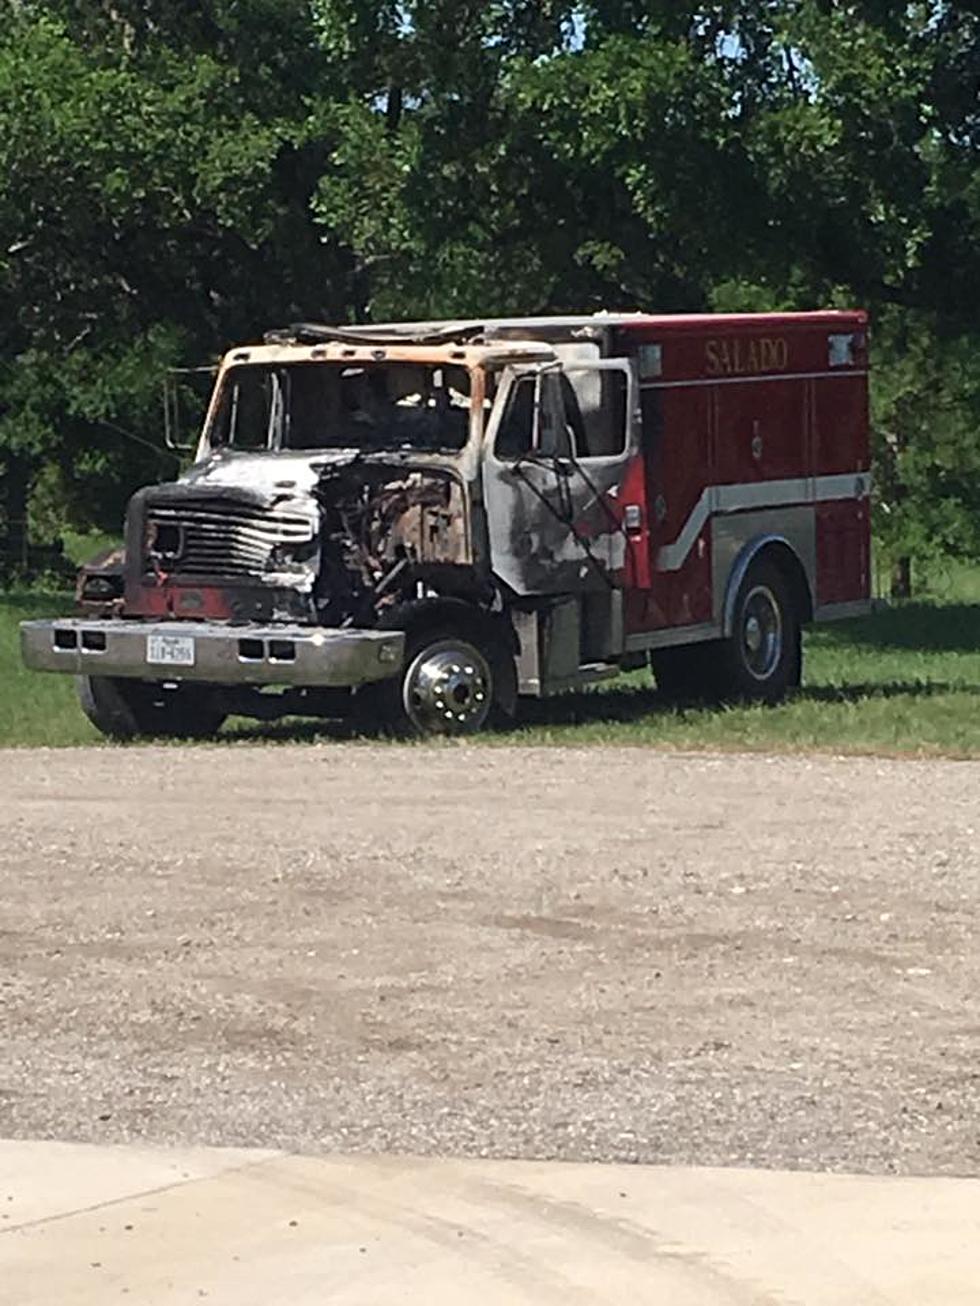 Salado Fire Truck Destroyed By Flames